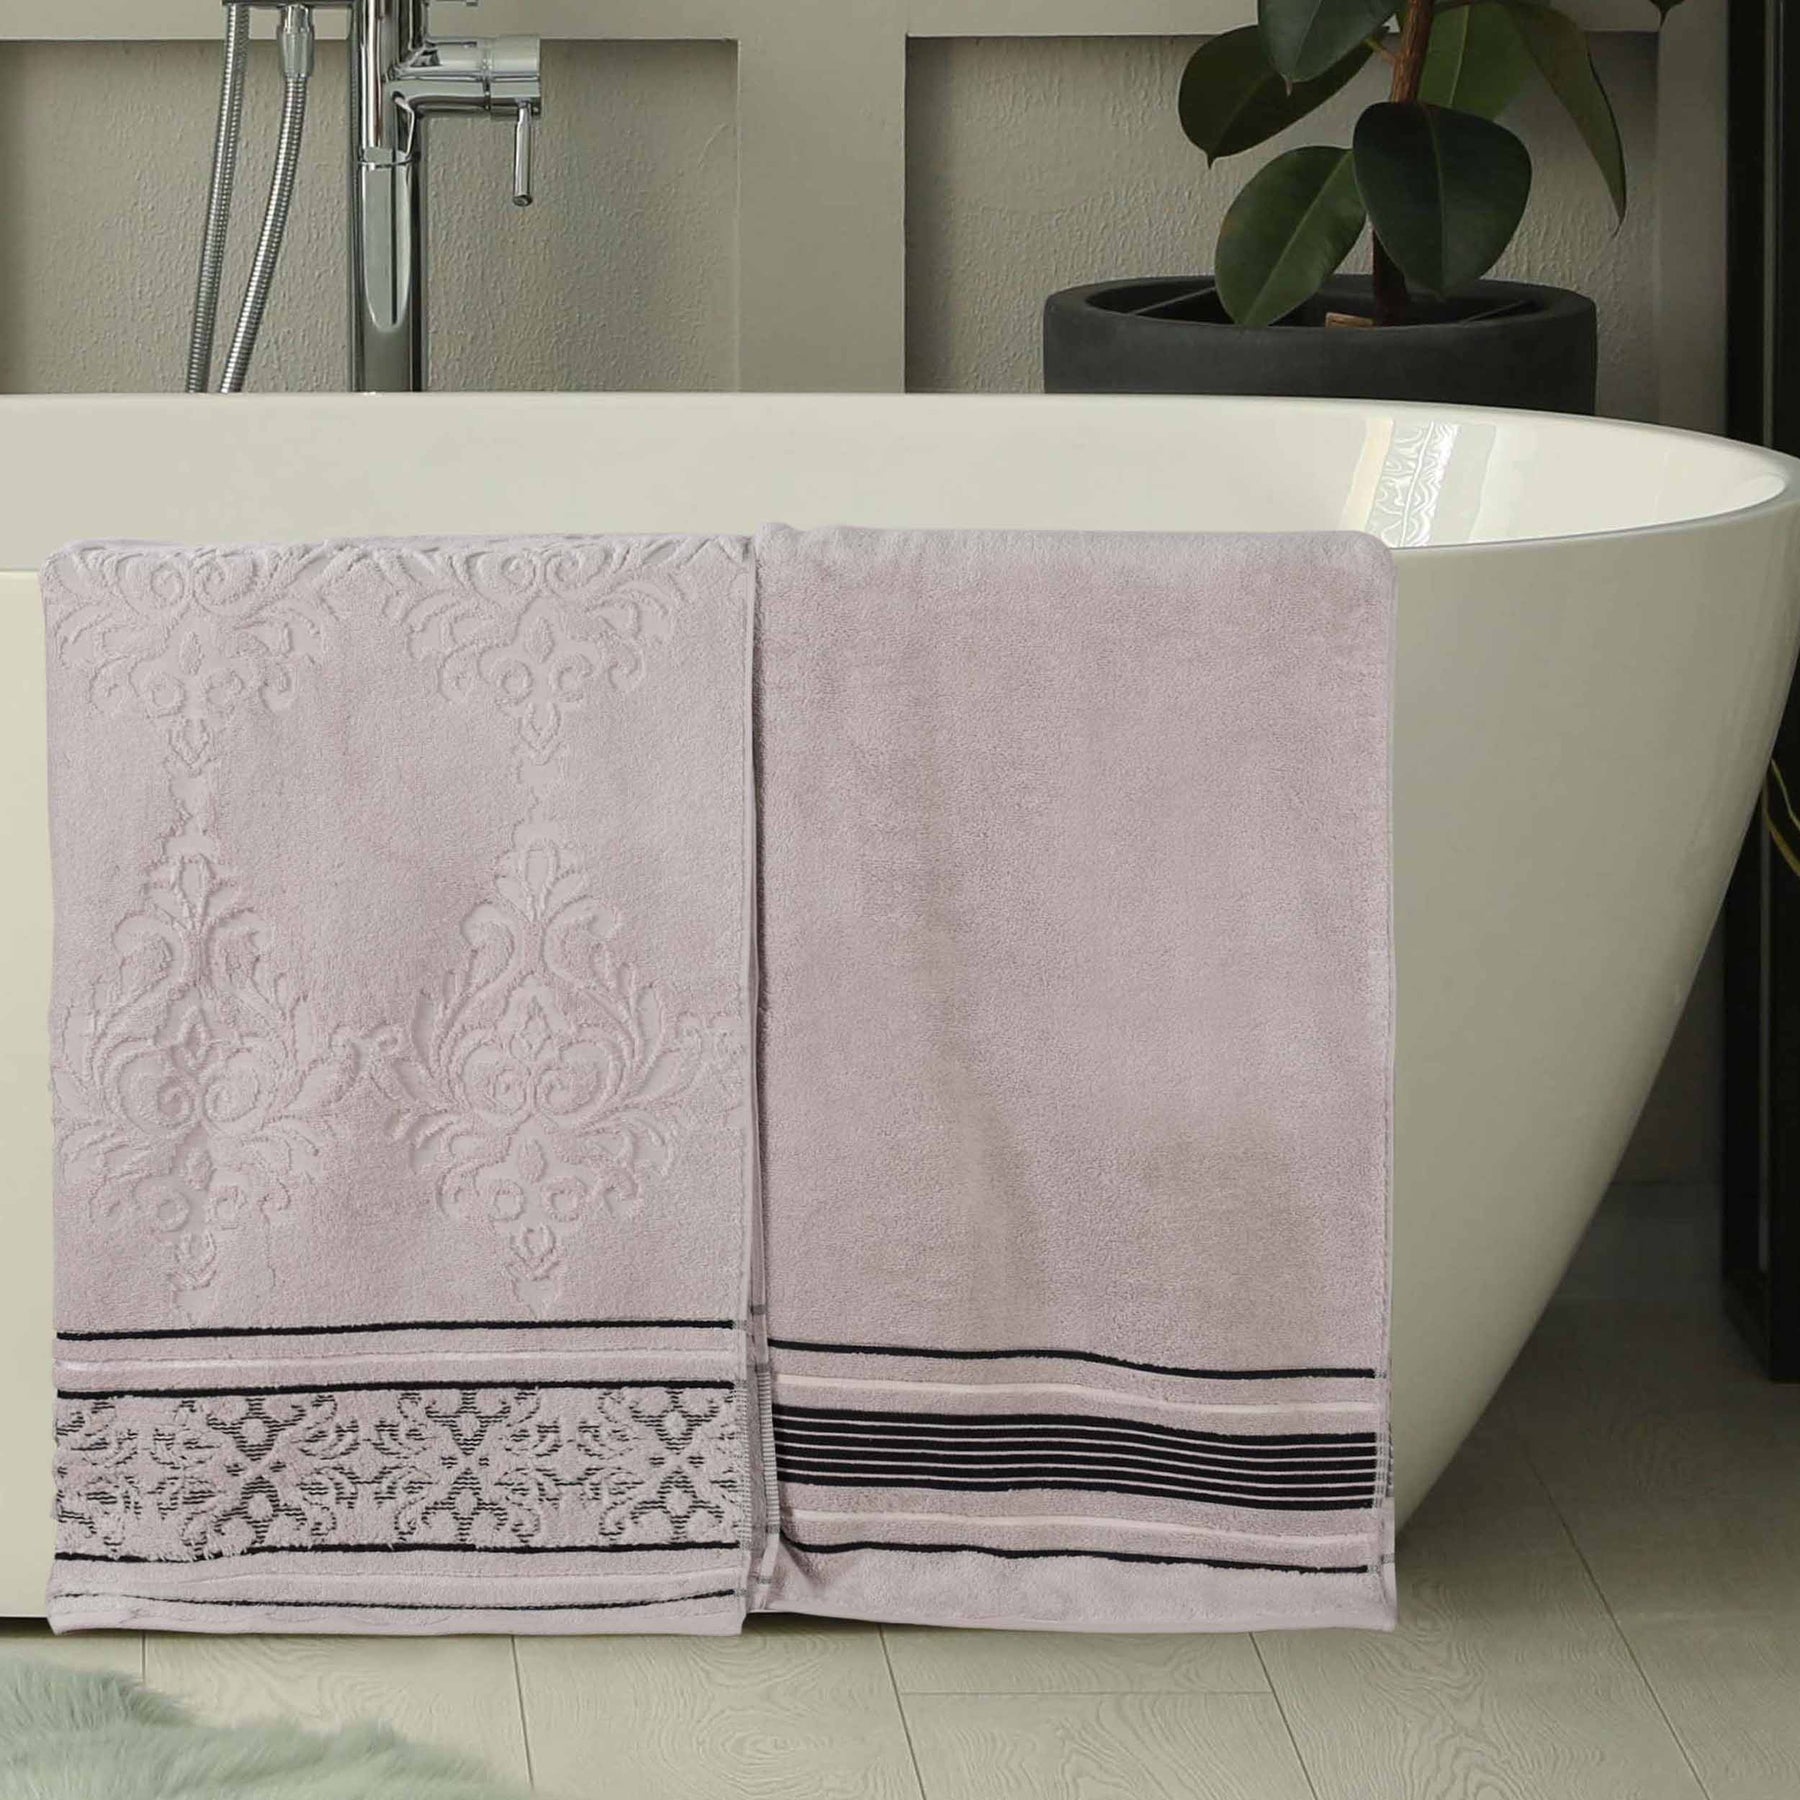 Zero Twist Cotton Solid And Floral Jacquard Bath Towel Set Of 4 By